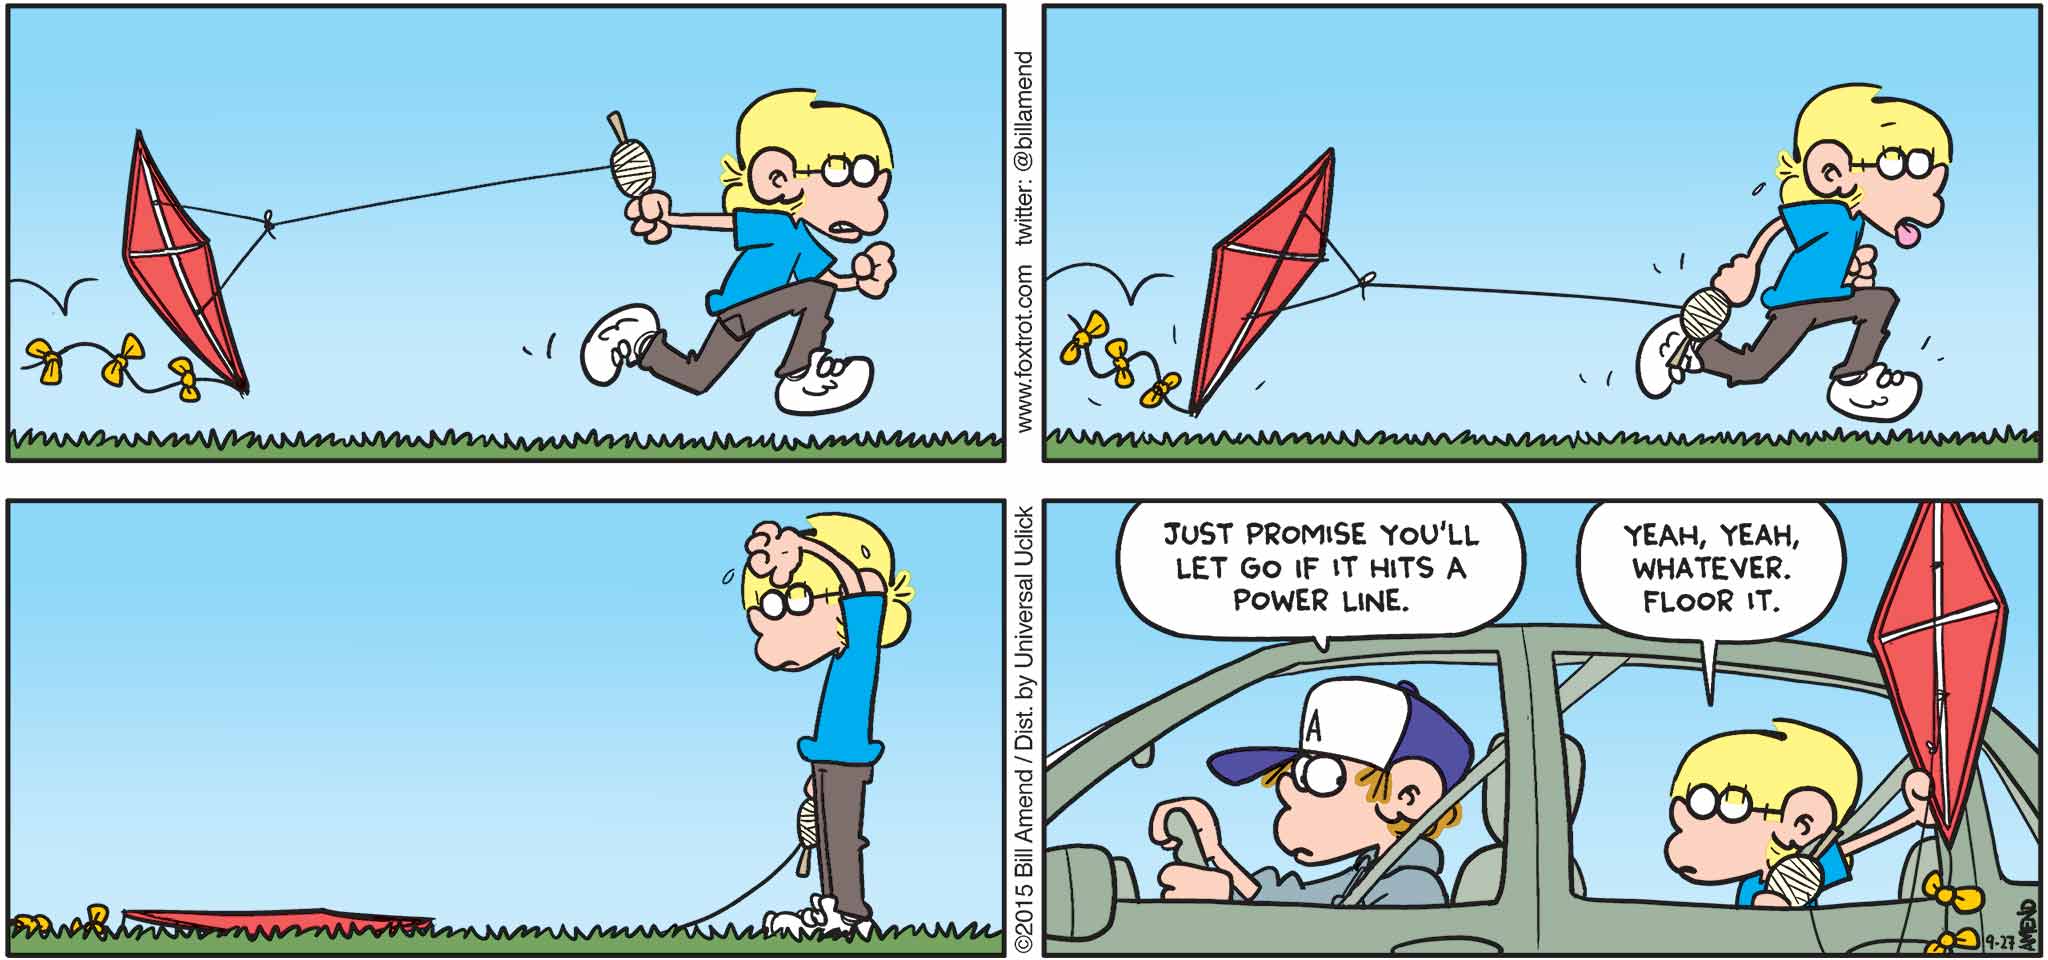 FoxTrot by Bill Amend - "Darwin Award Incoming" published September 27, 2015 - Peter: Just promise you'll let go if it hits a power line. Yeah, yeah, whatever. Floor it. 